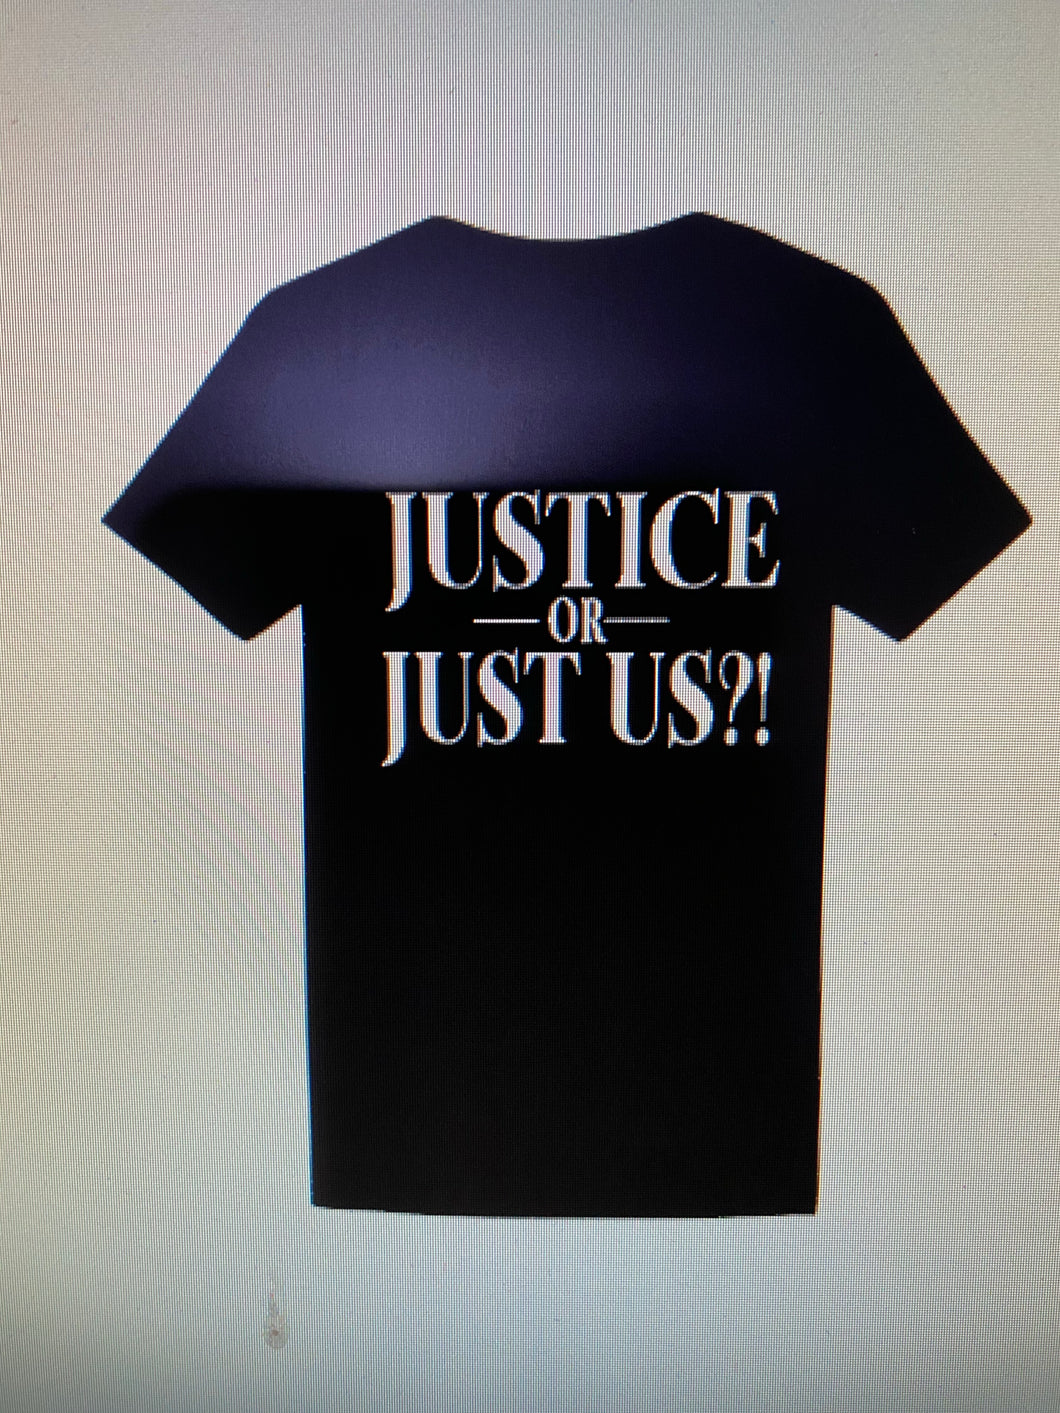 Justice or Just US?!